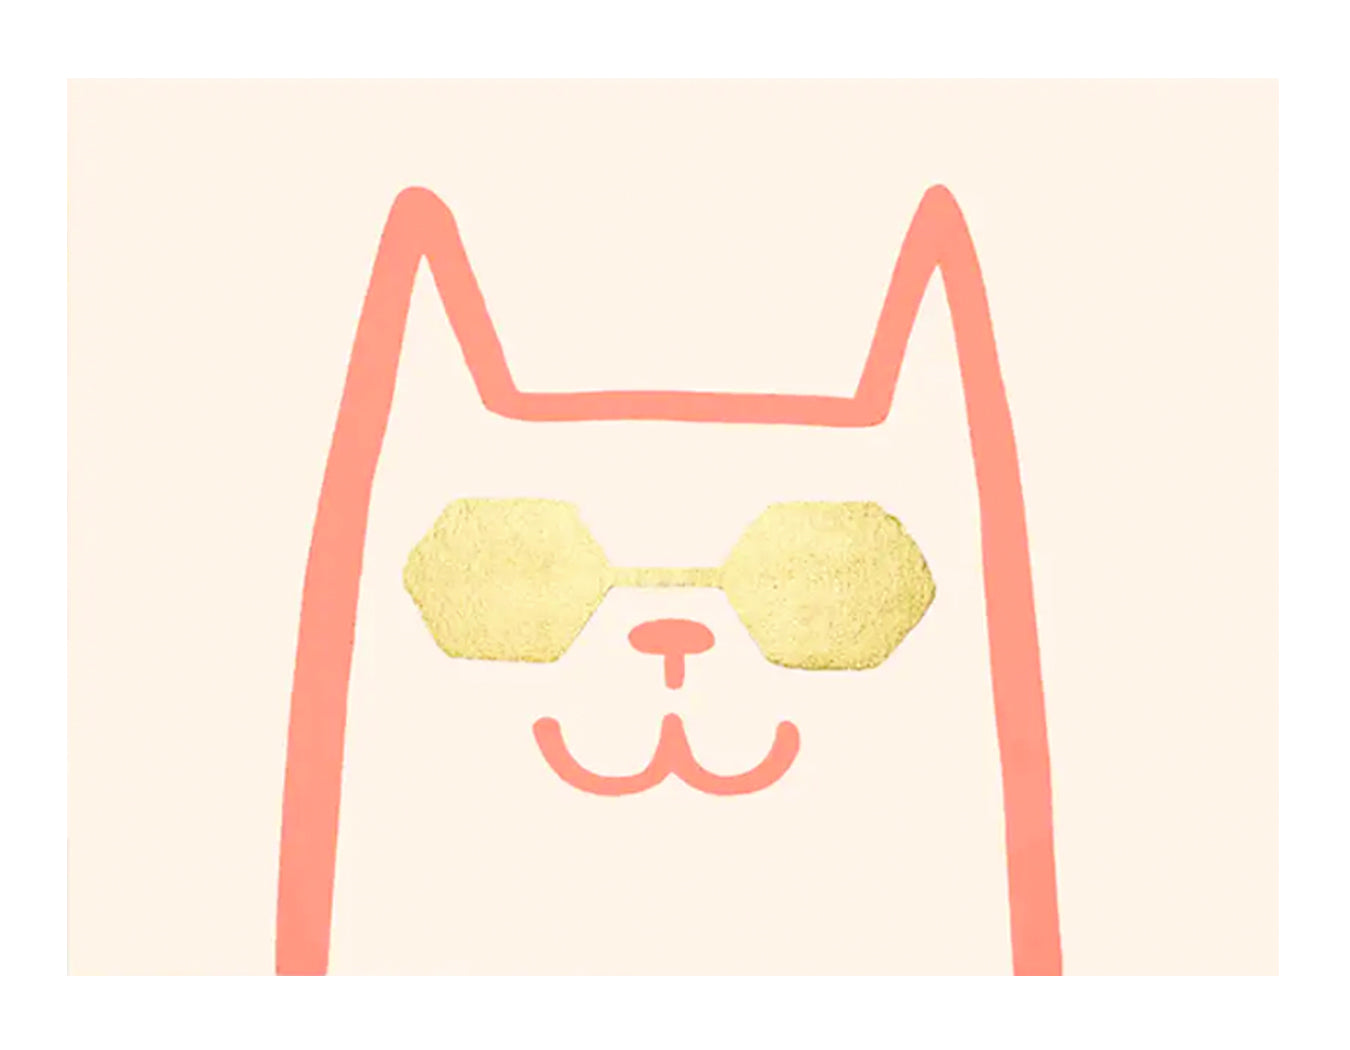 pink outline of cat with gold foil sunglasses. light pink card